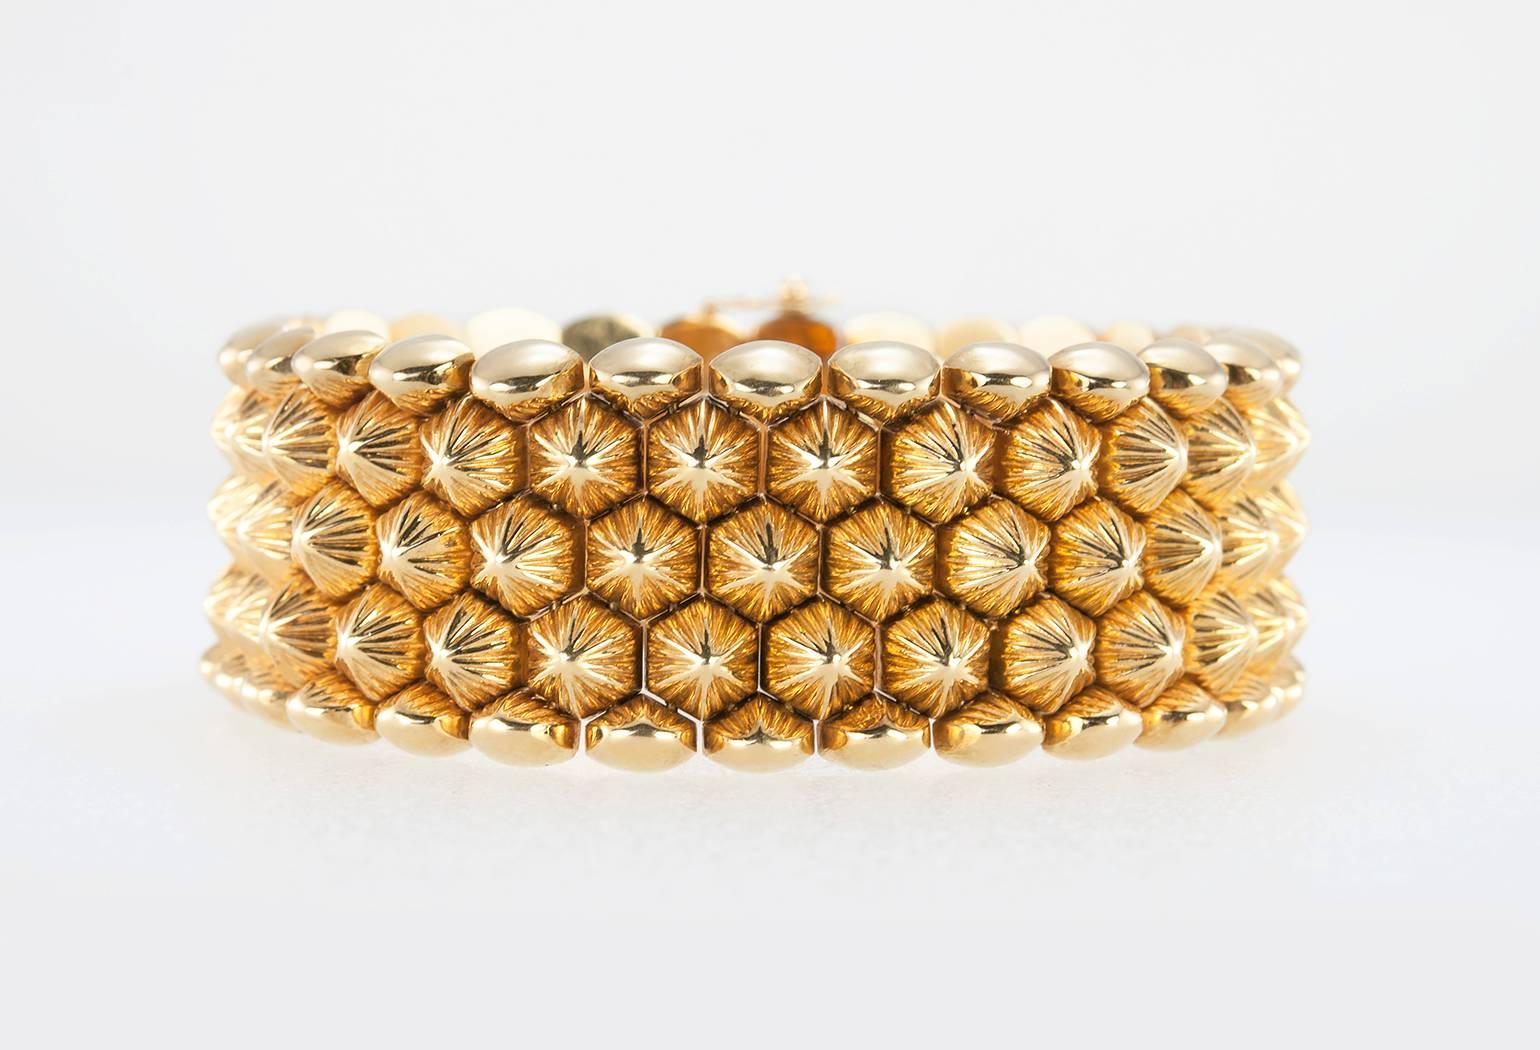 A very cool Retro gold link bracelet in 18 karat orangey-yellow gold.  There first and last row have rounded, dome shaped links while the middle three rows have pointed, spikey dome on the textured gold links.  The back of the bracelet is smooth and